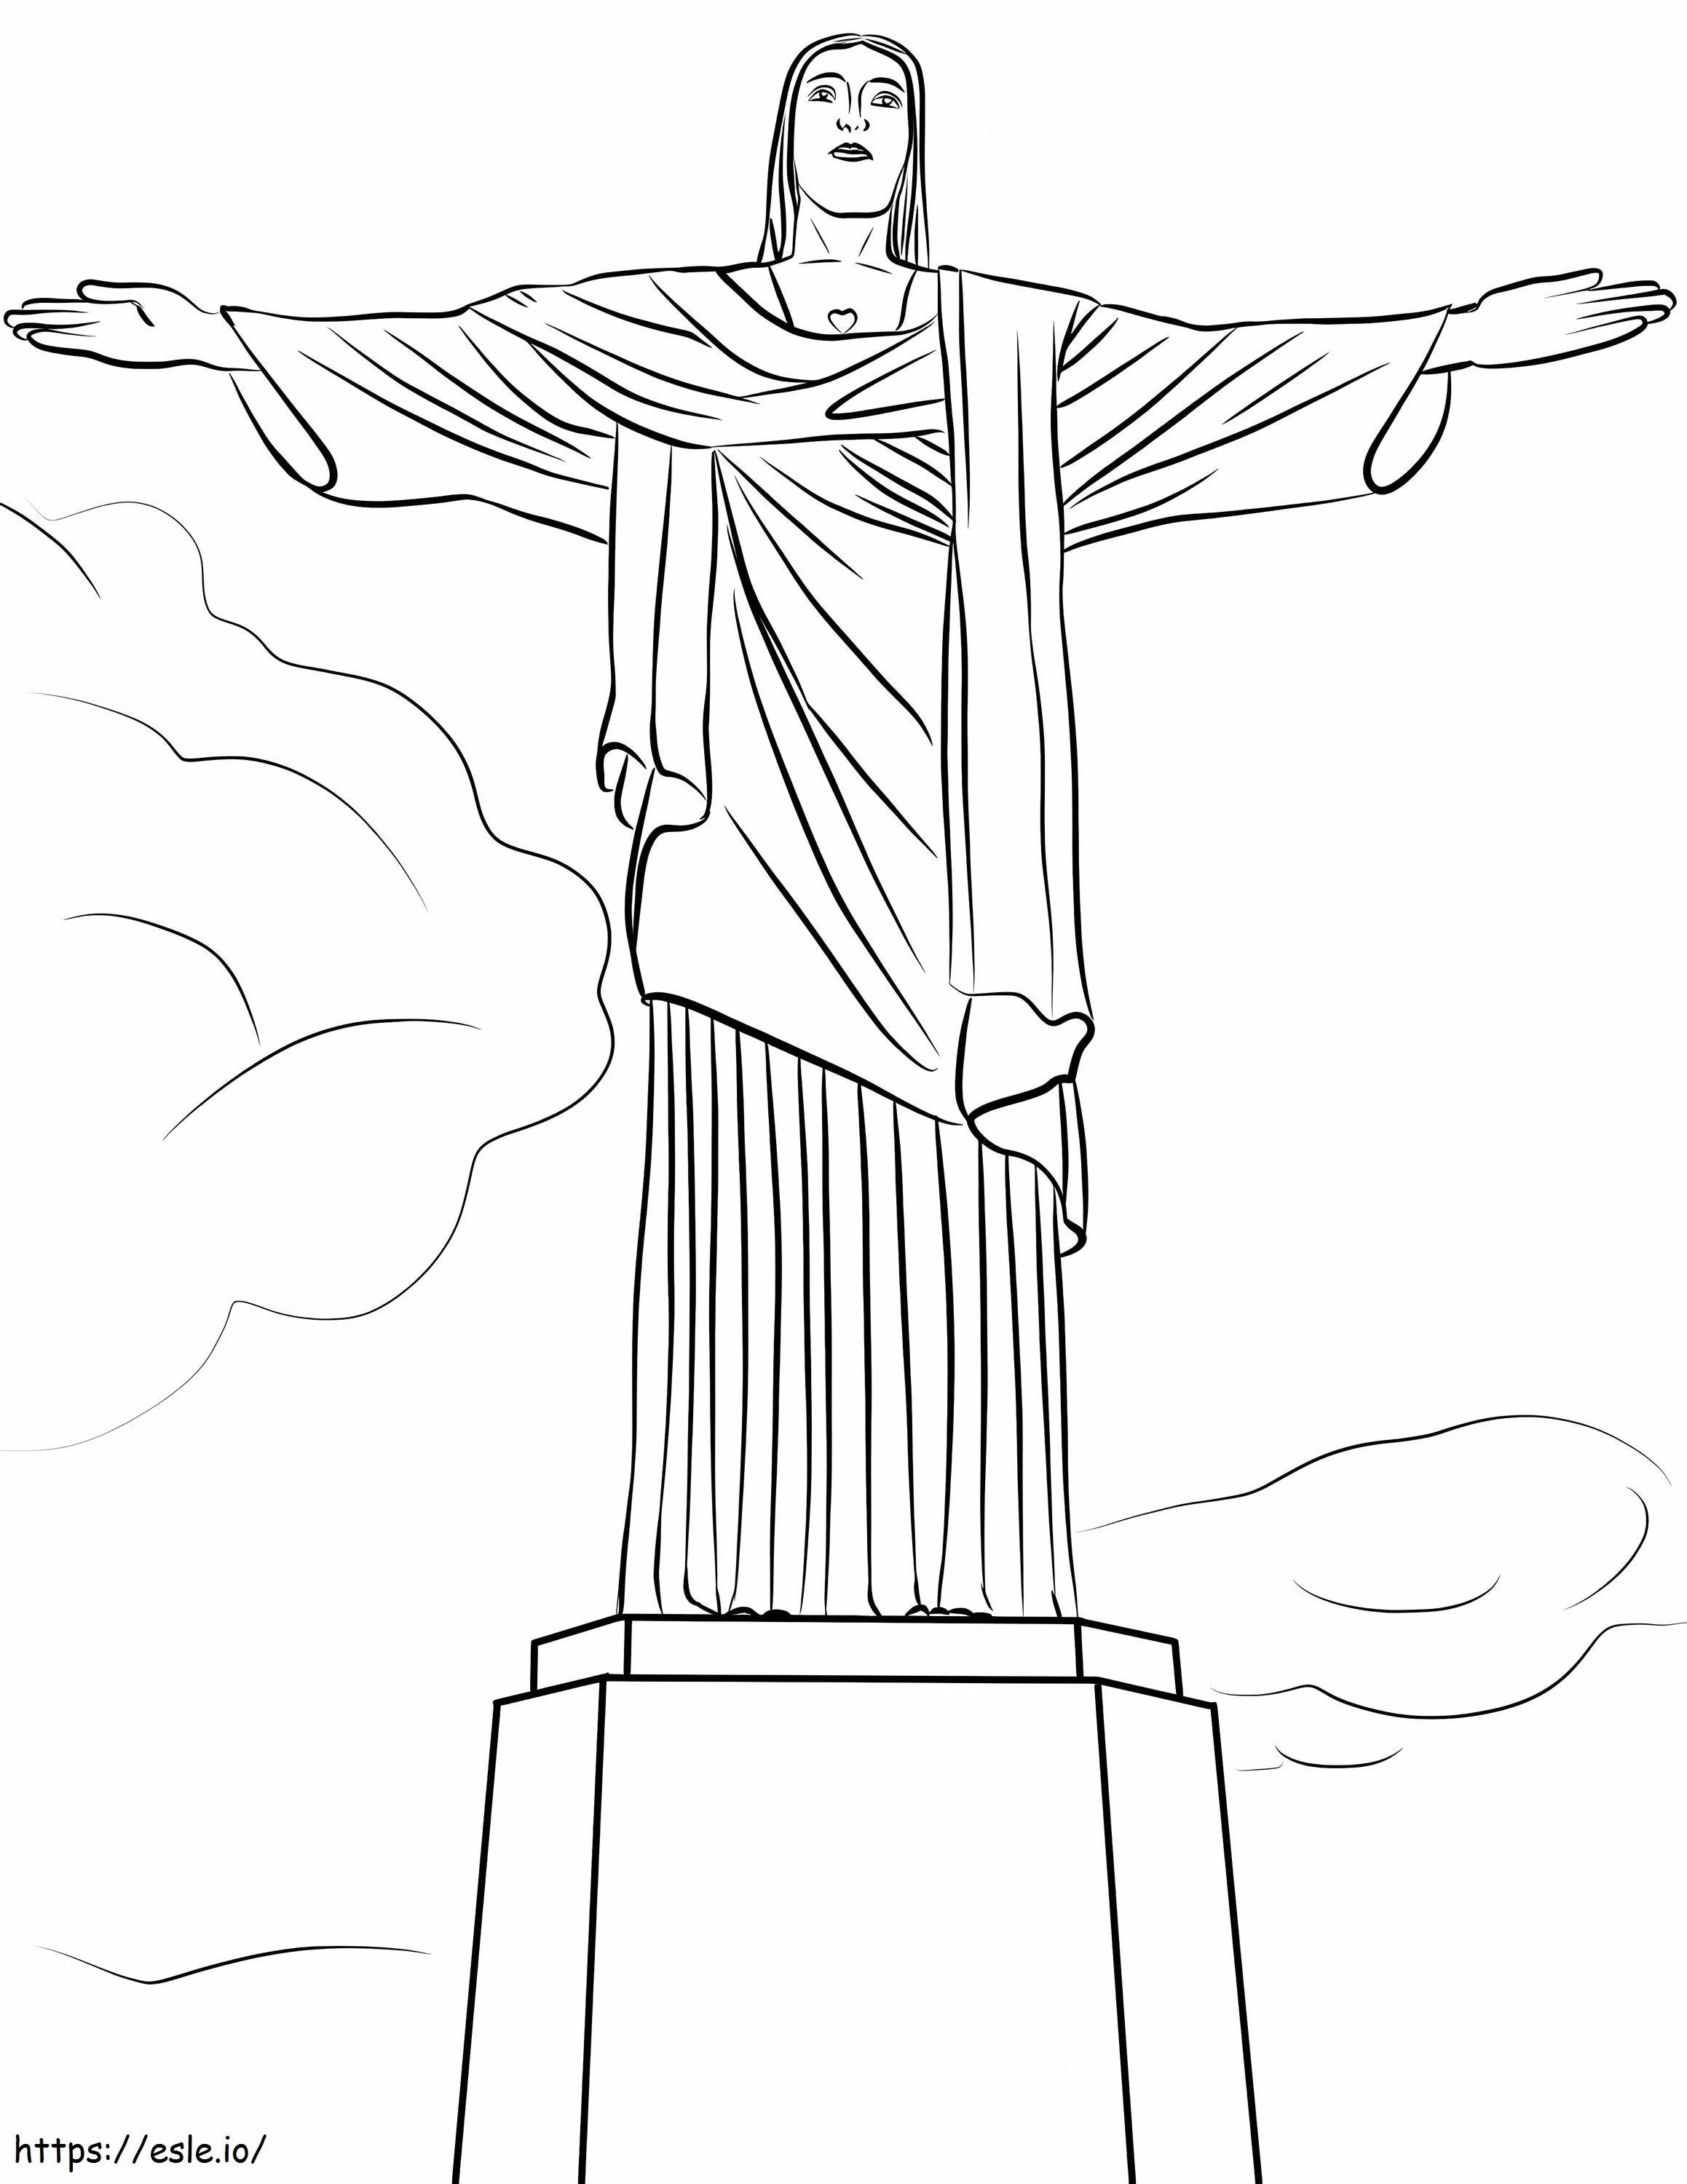 1542942627 Christ The Redeemer Statue coloring page